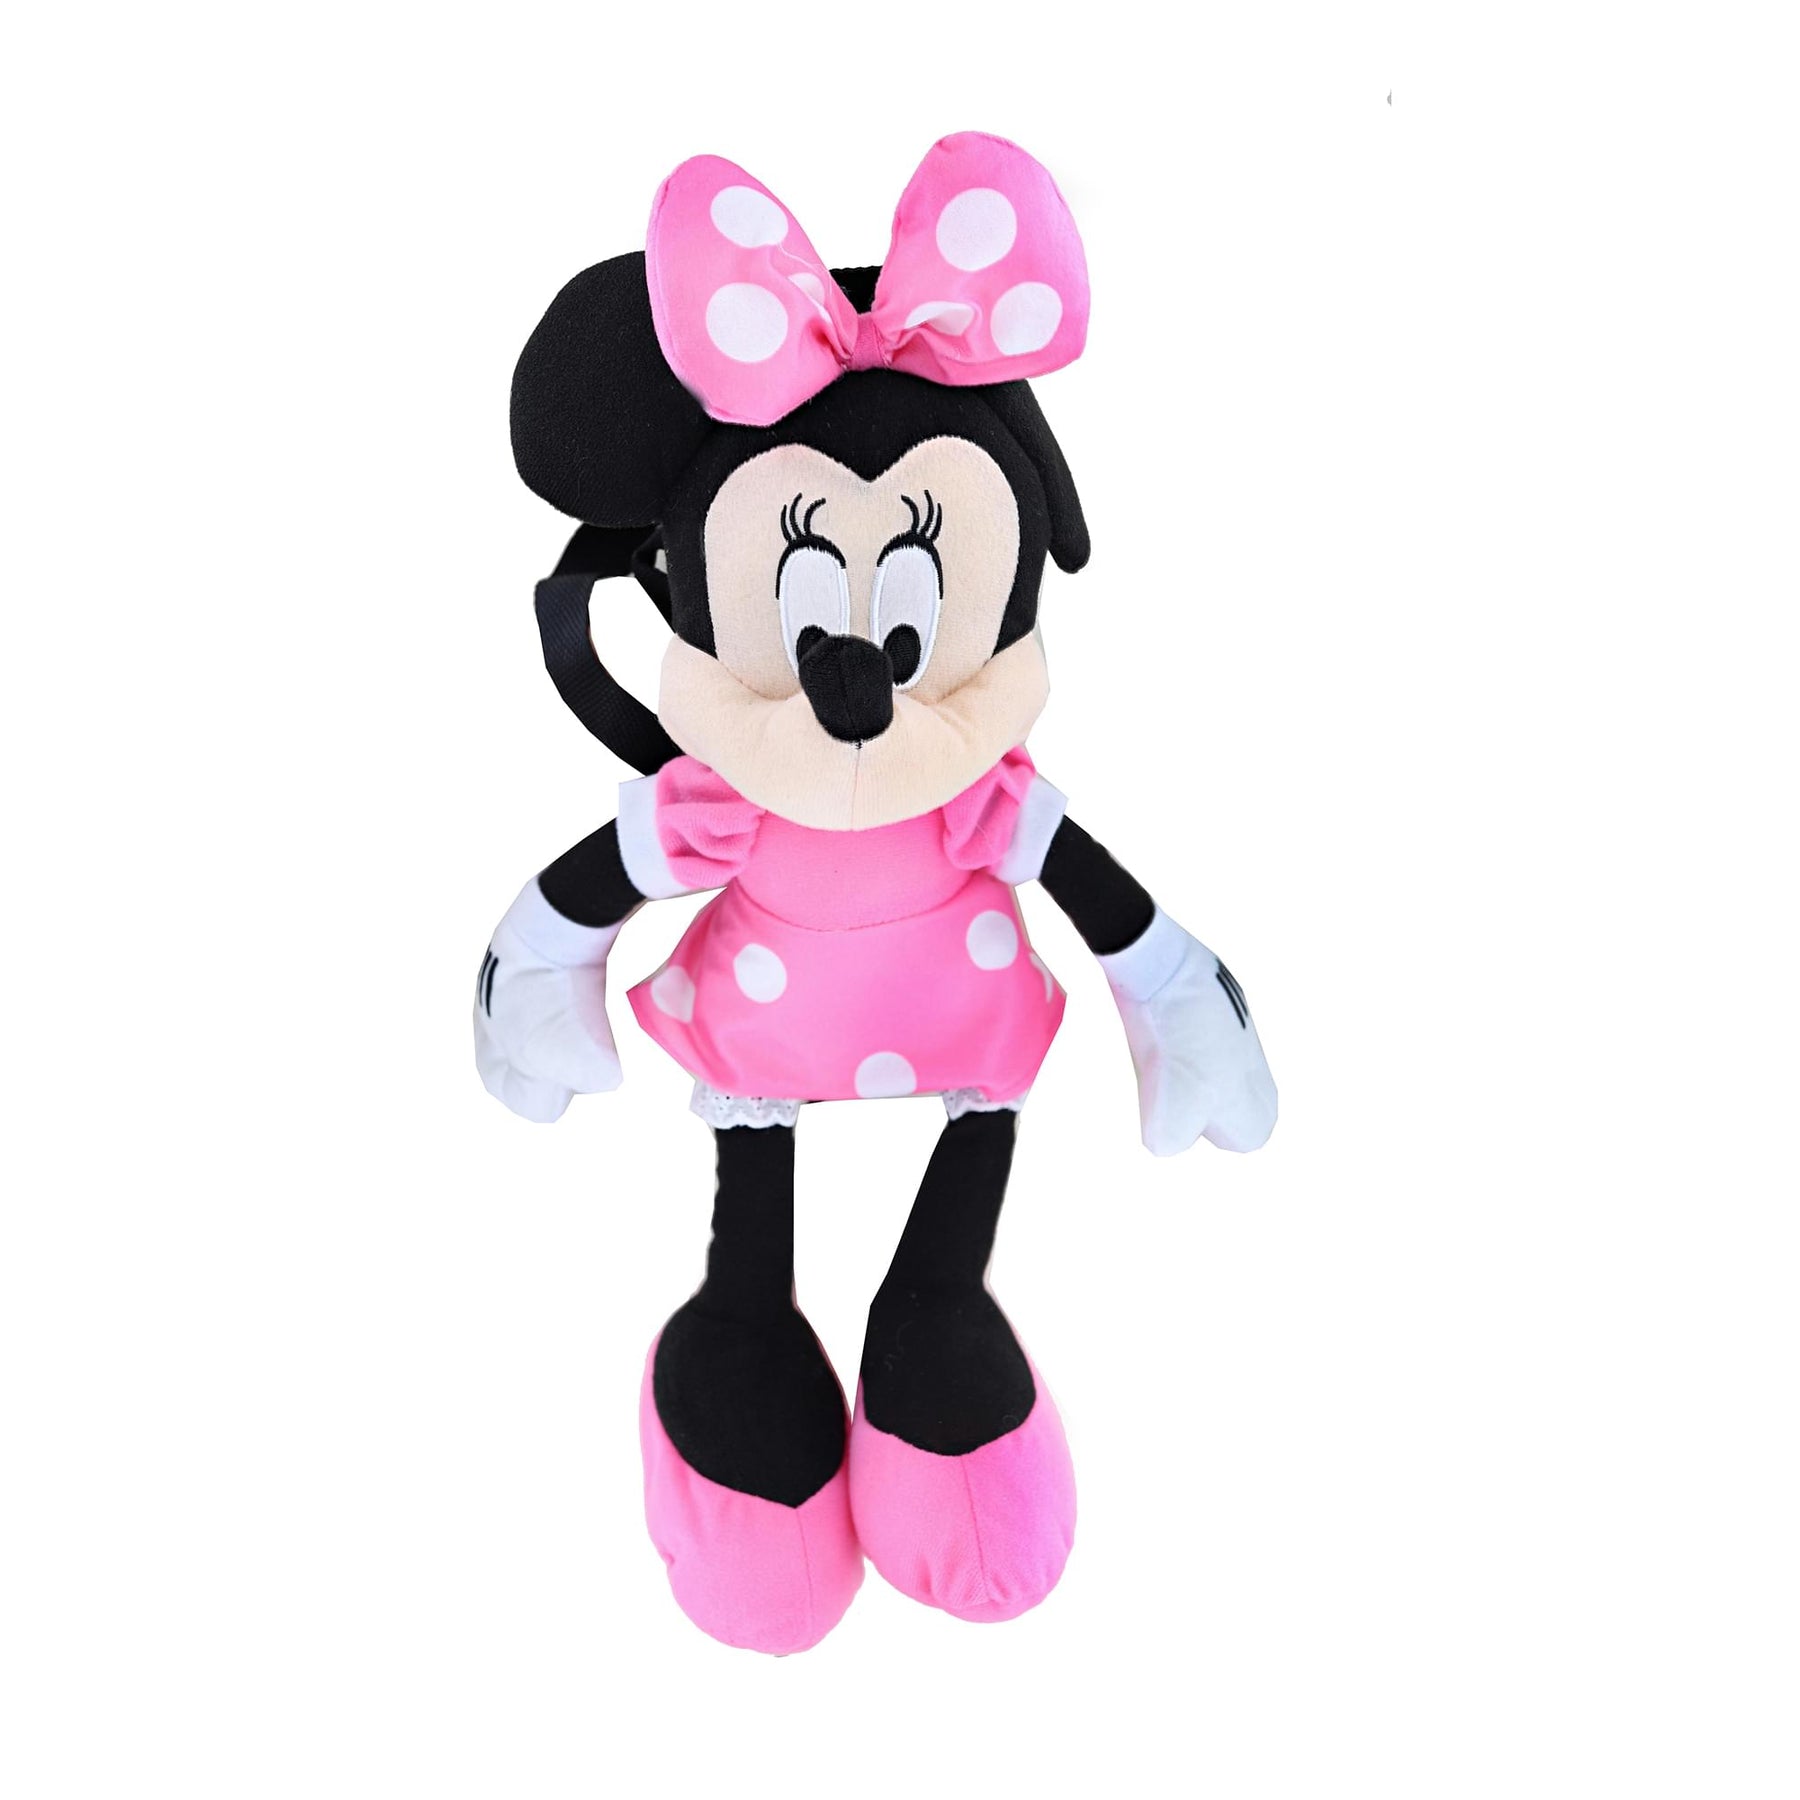 Disney Minnie Mouse 15 Inch Plush Backpack